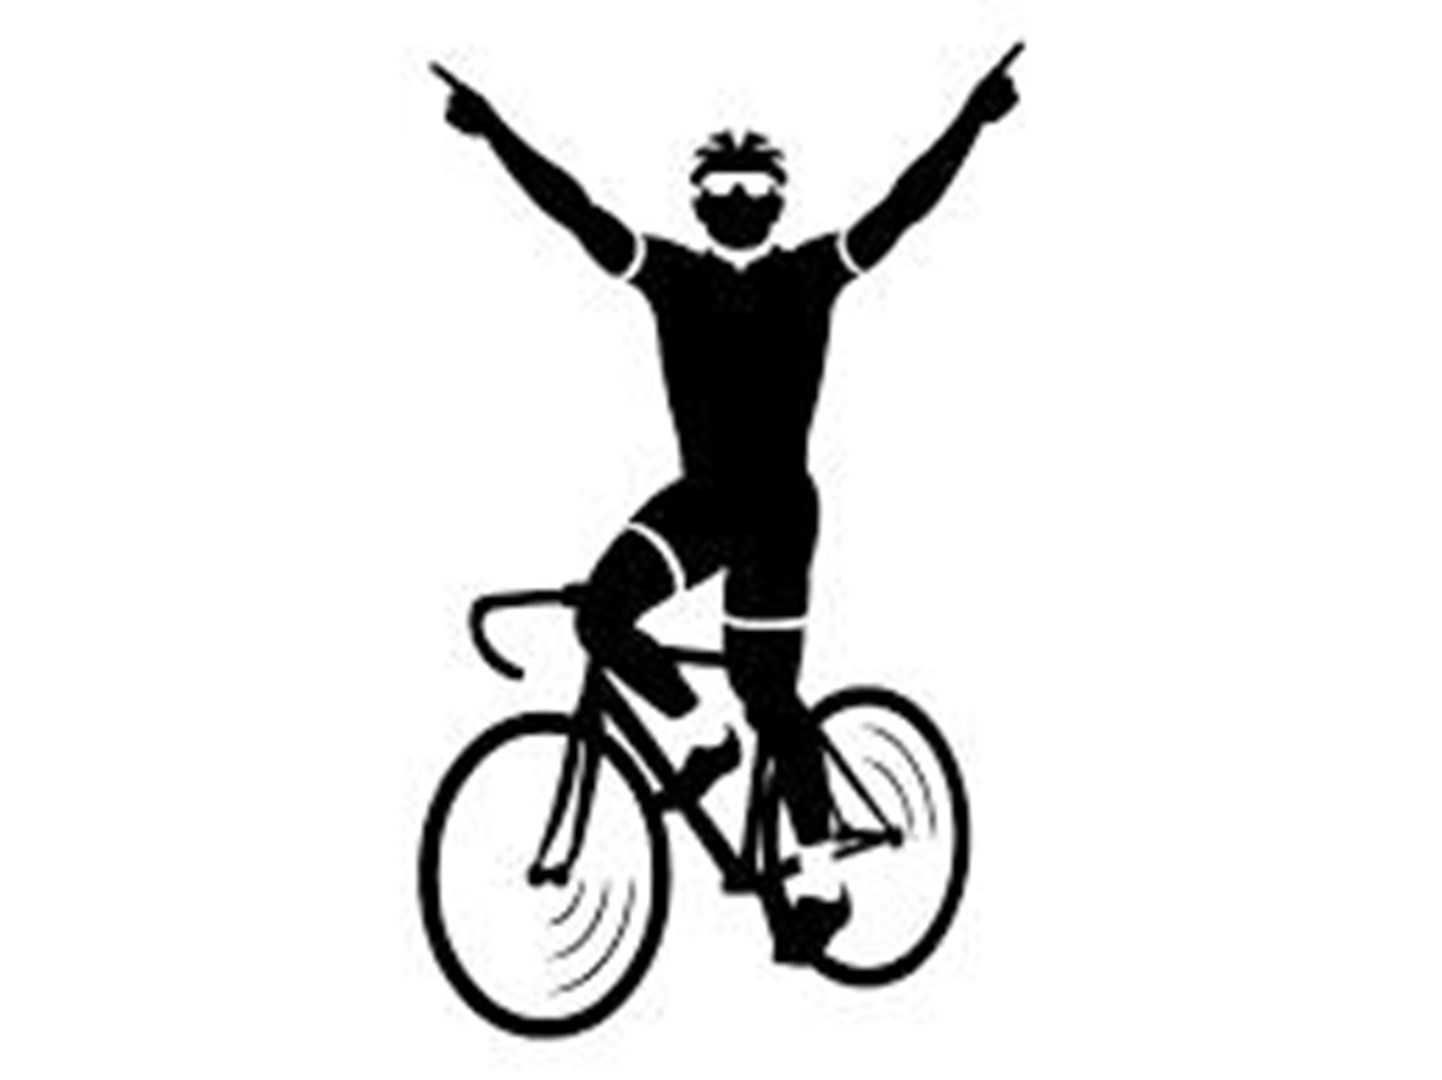 Cyclist Winner Silhouette Stock Illustration - Download Image Now ...